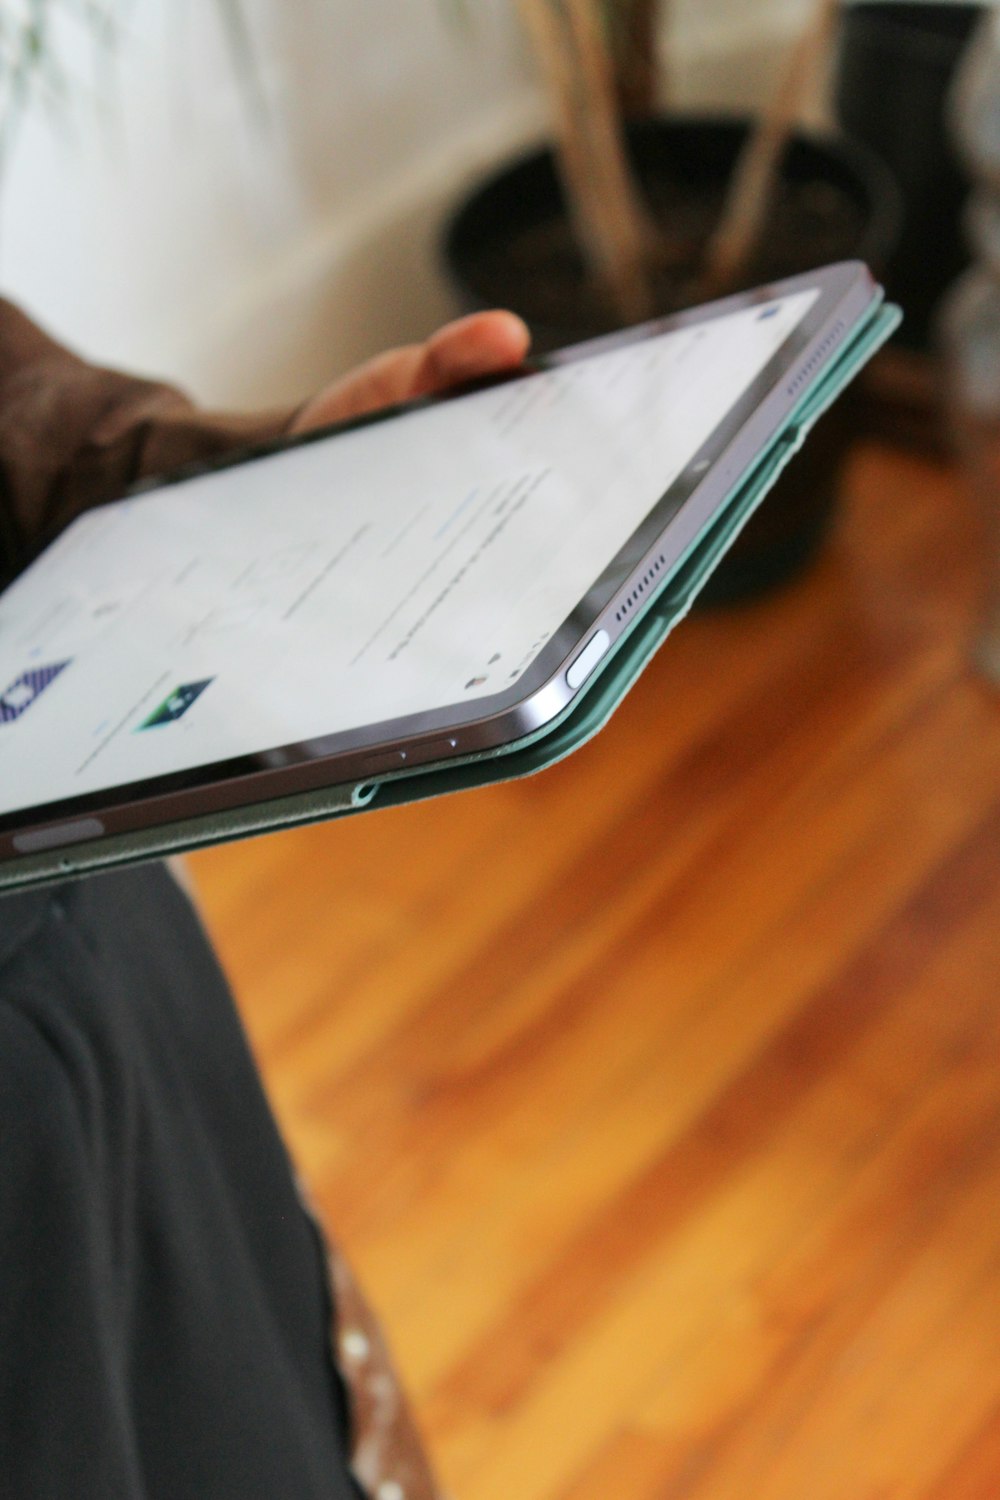 a person holding a tablet in their hand